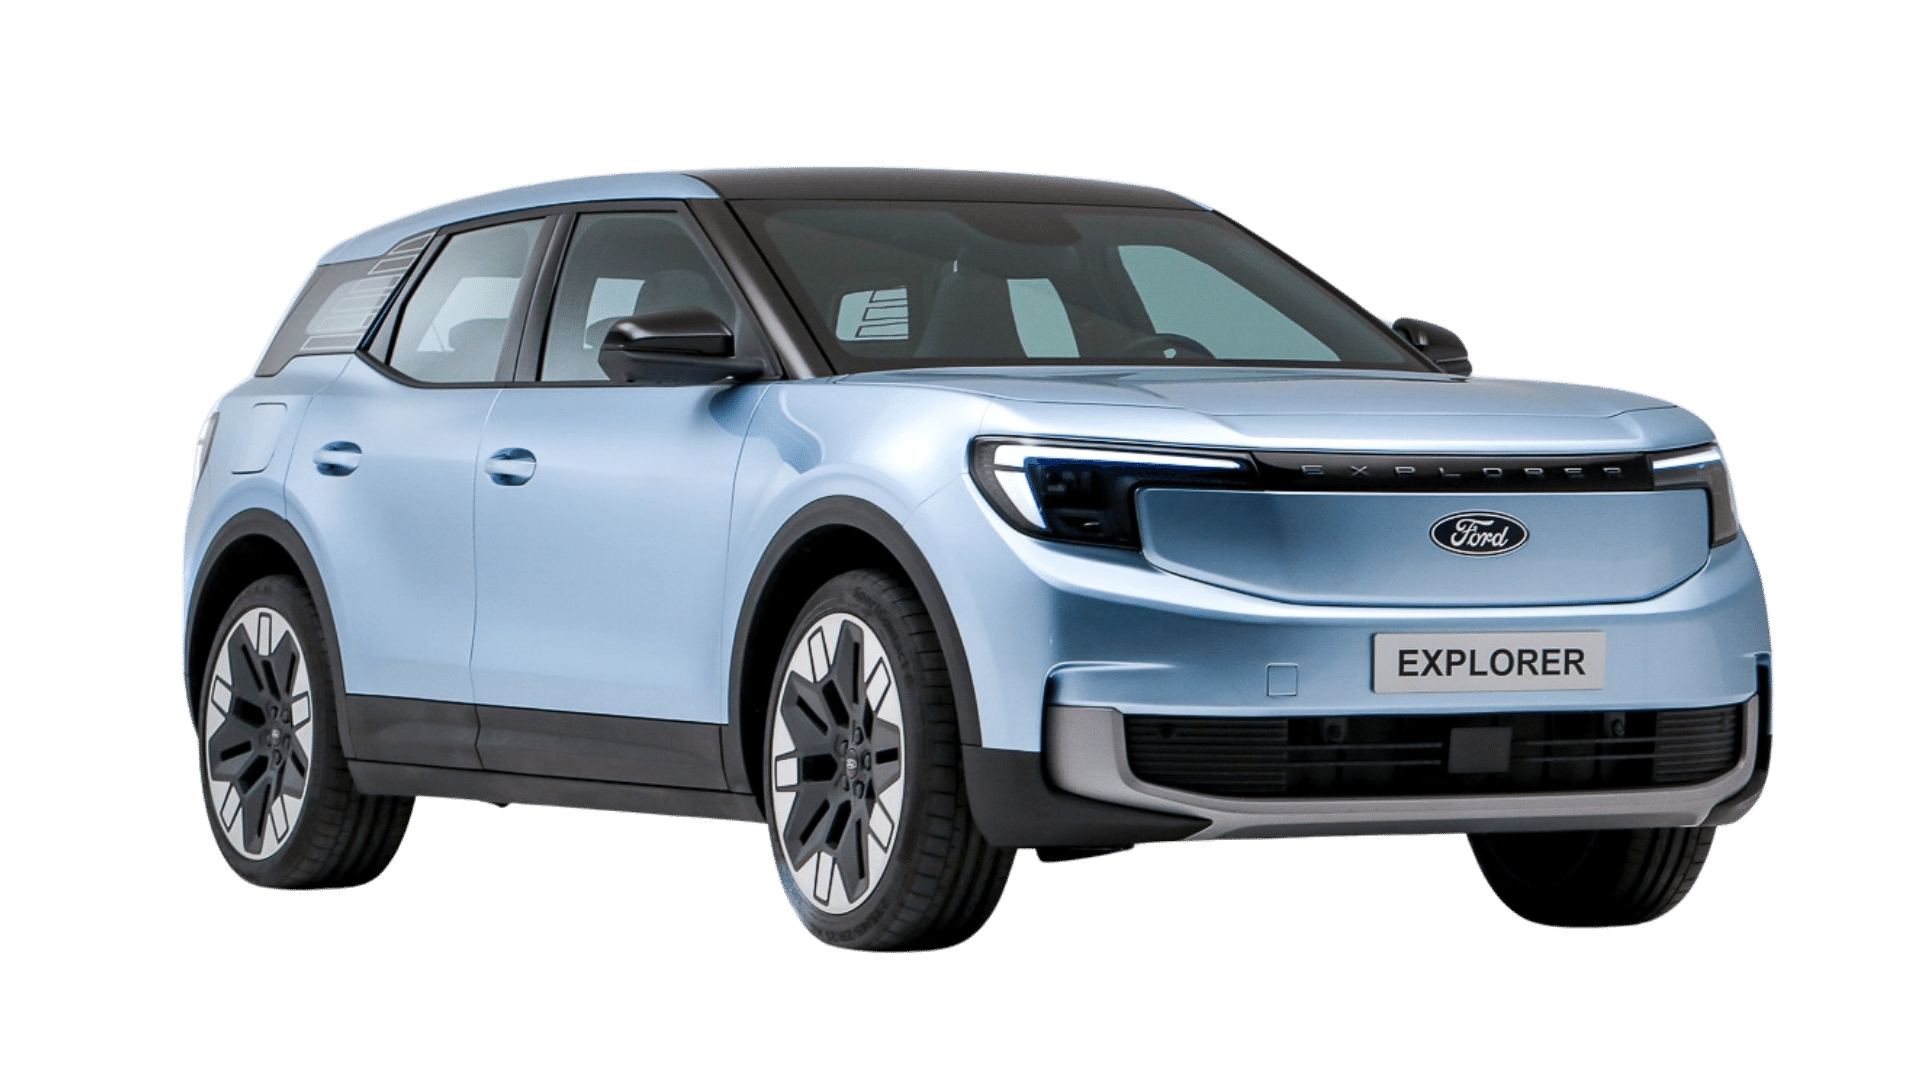 Ford Explorer electric charging station